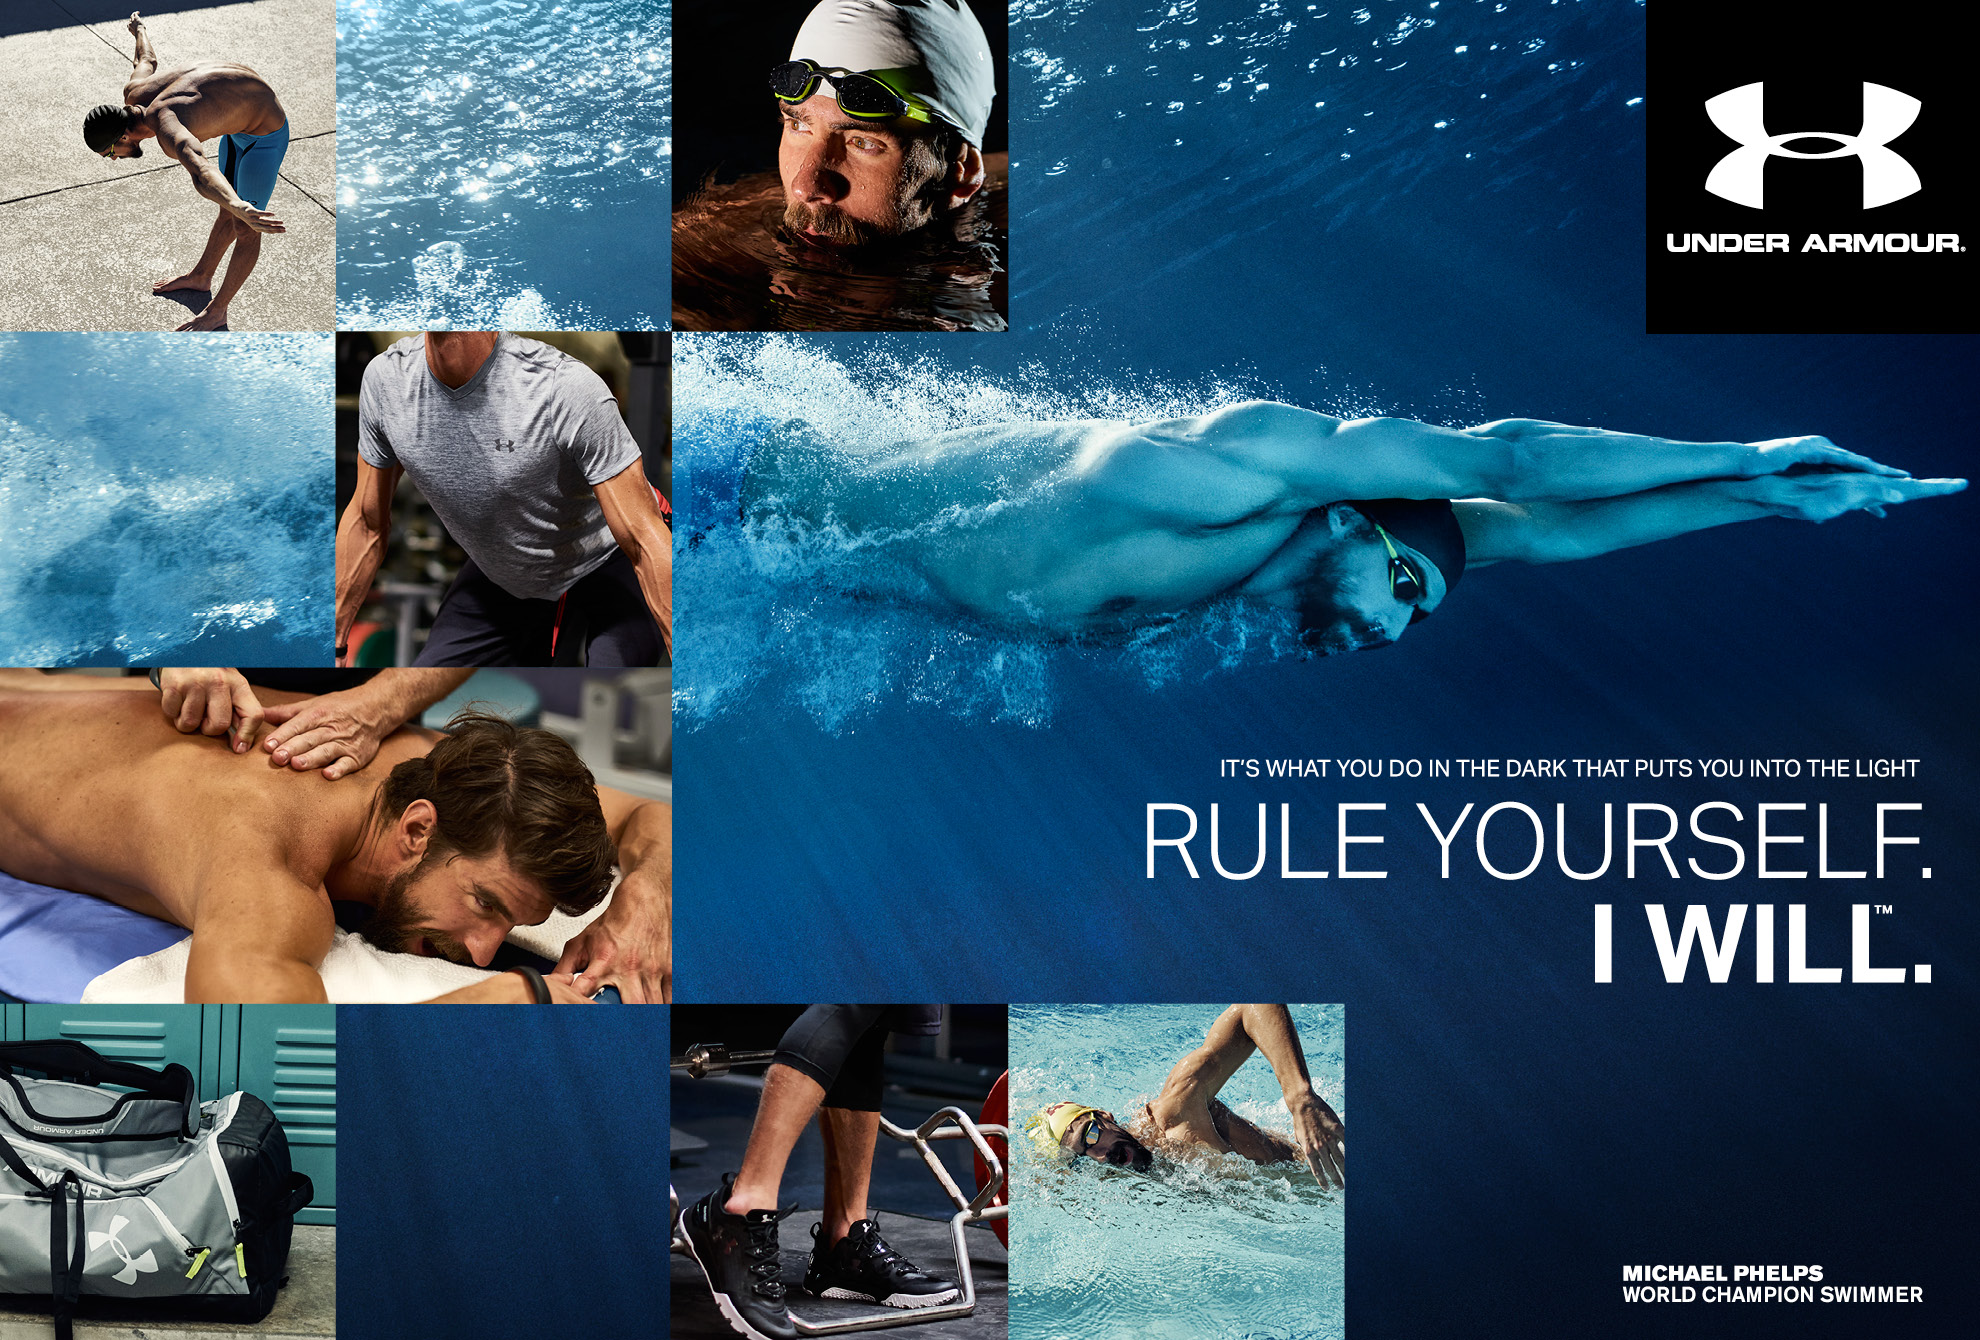 rule yourself Under Armour 2016 michael Phelps